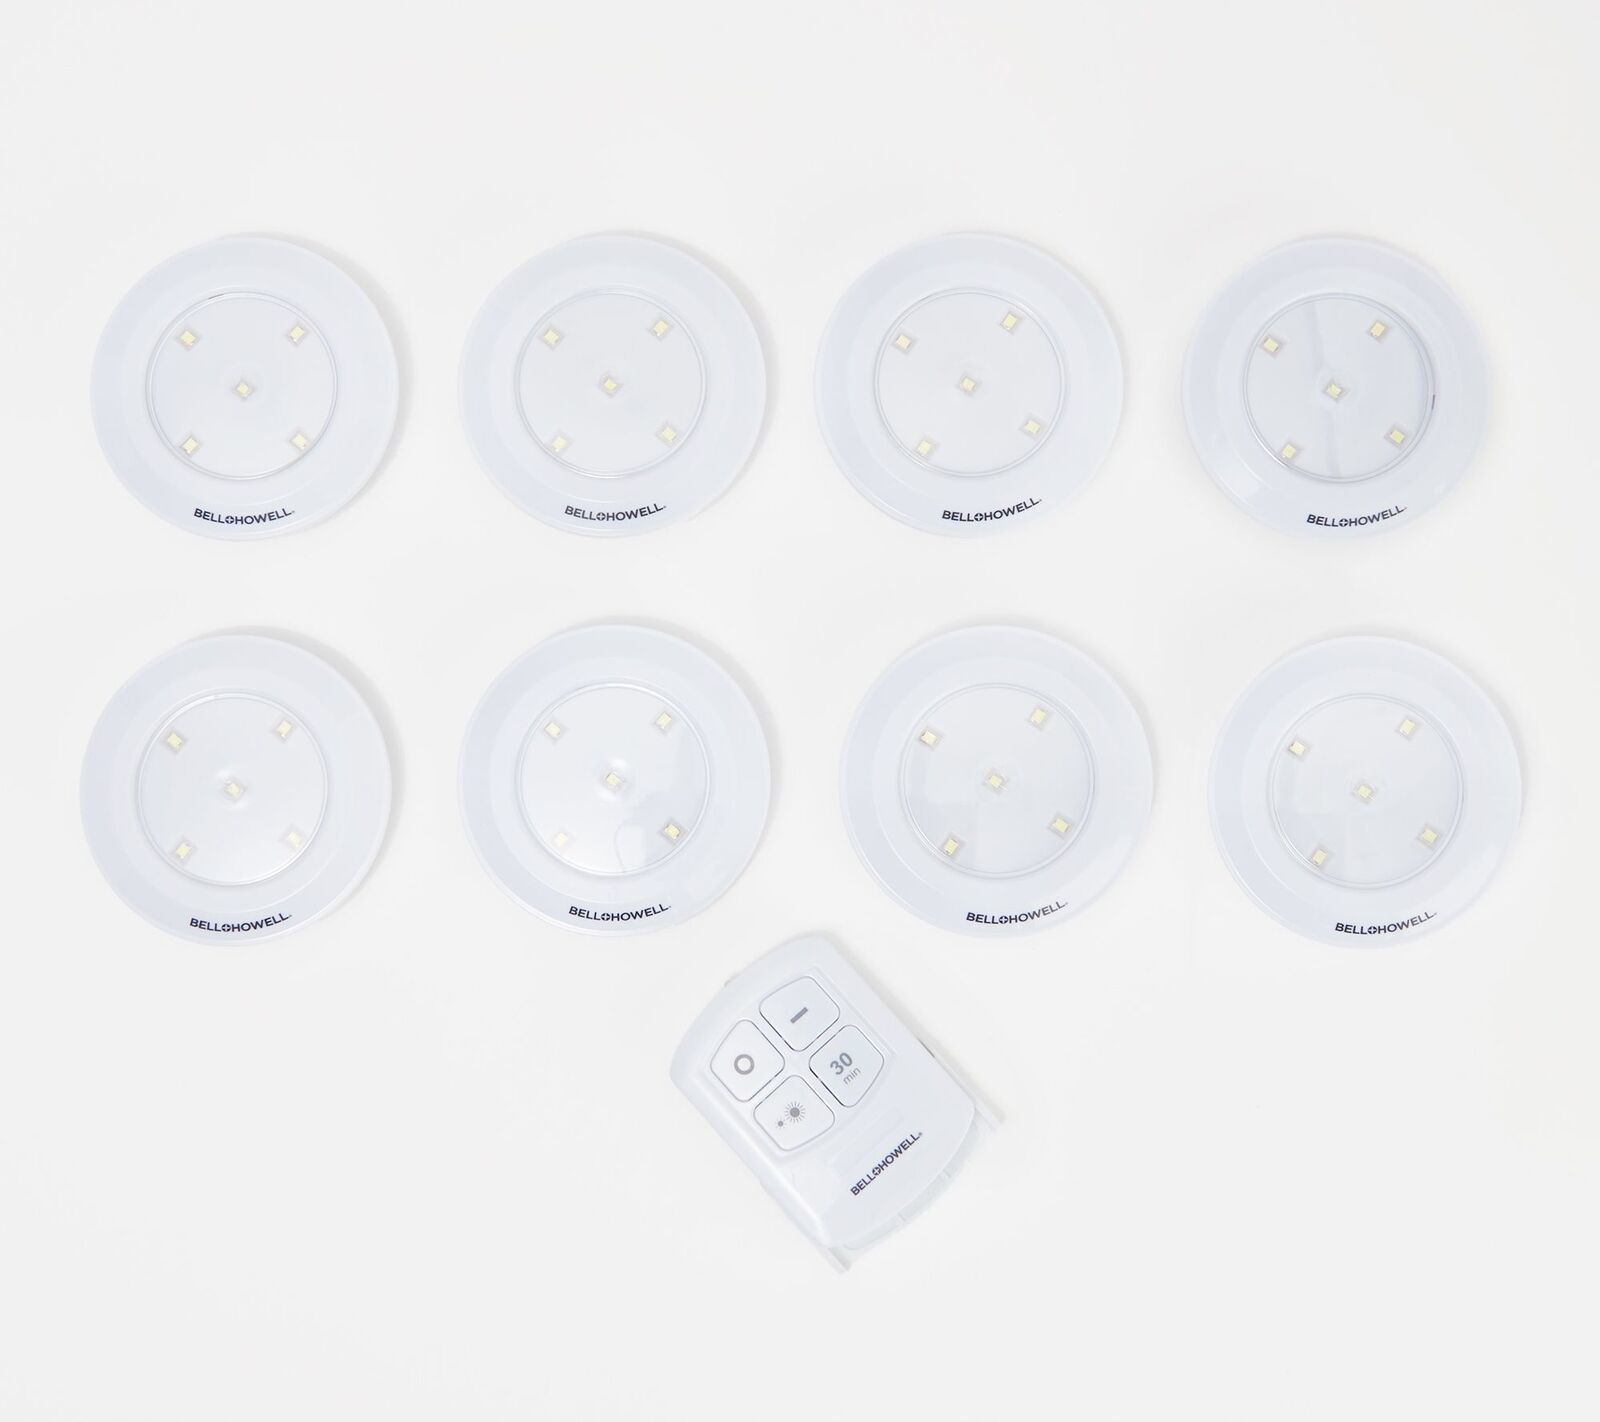 Bell & Howell Set of 8 Remote Controlled Pod Lights in White - $38.79